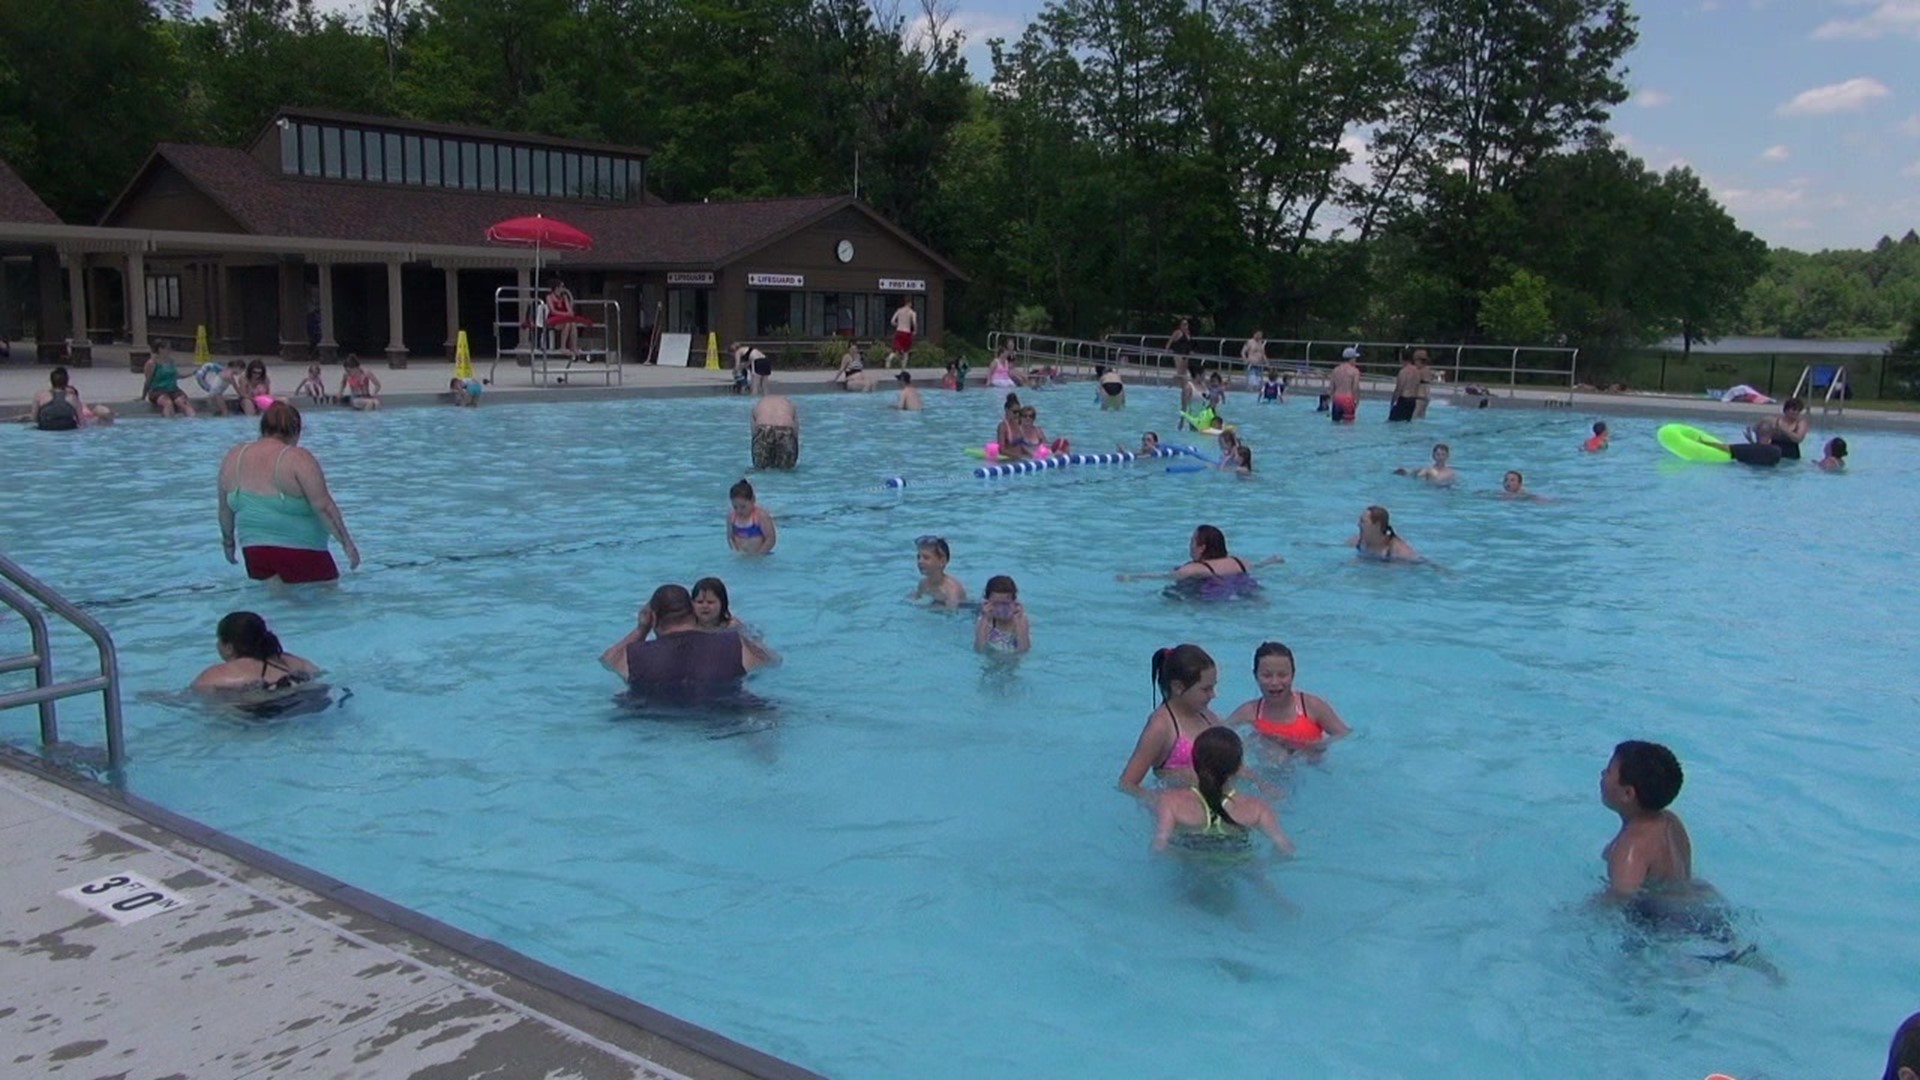 Lifeguards from other state parks have agreed to cover shifts at the park.